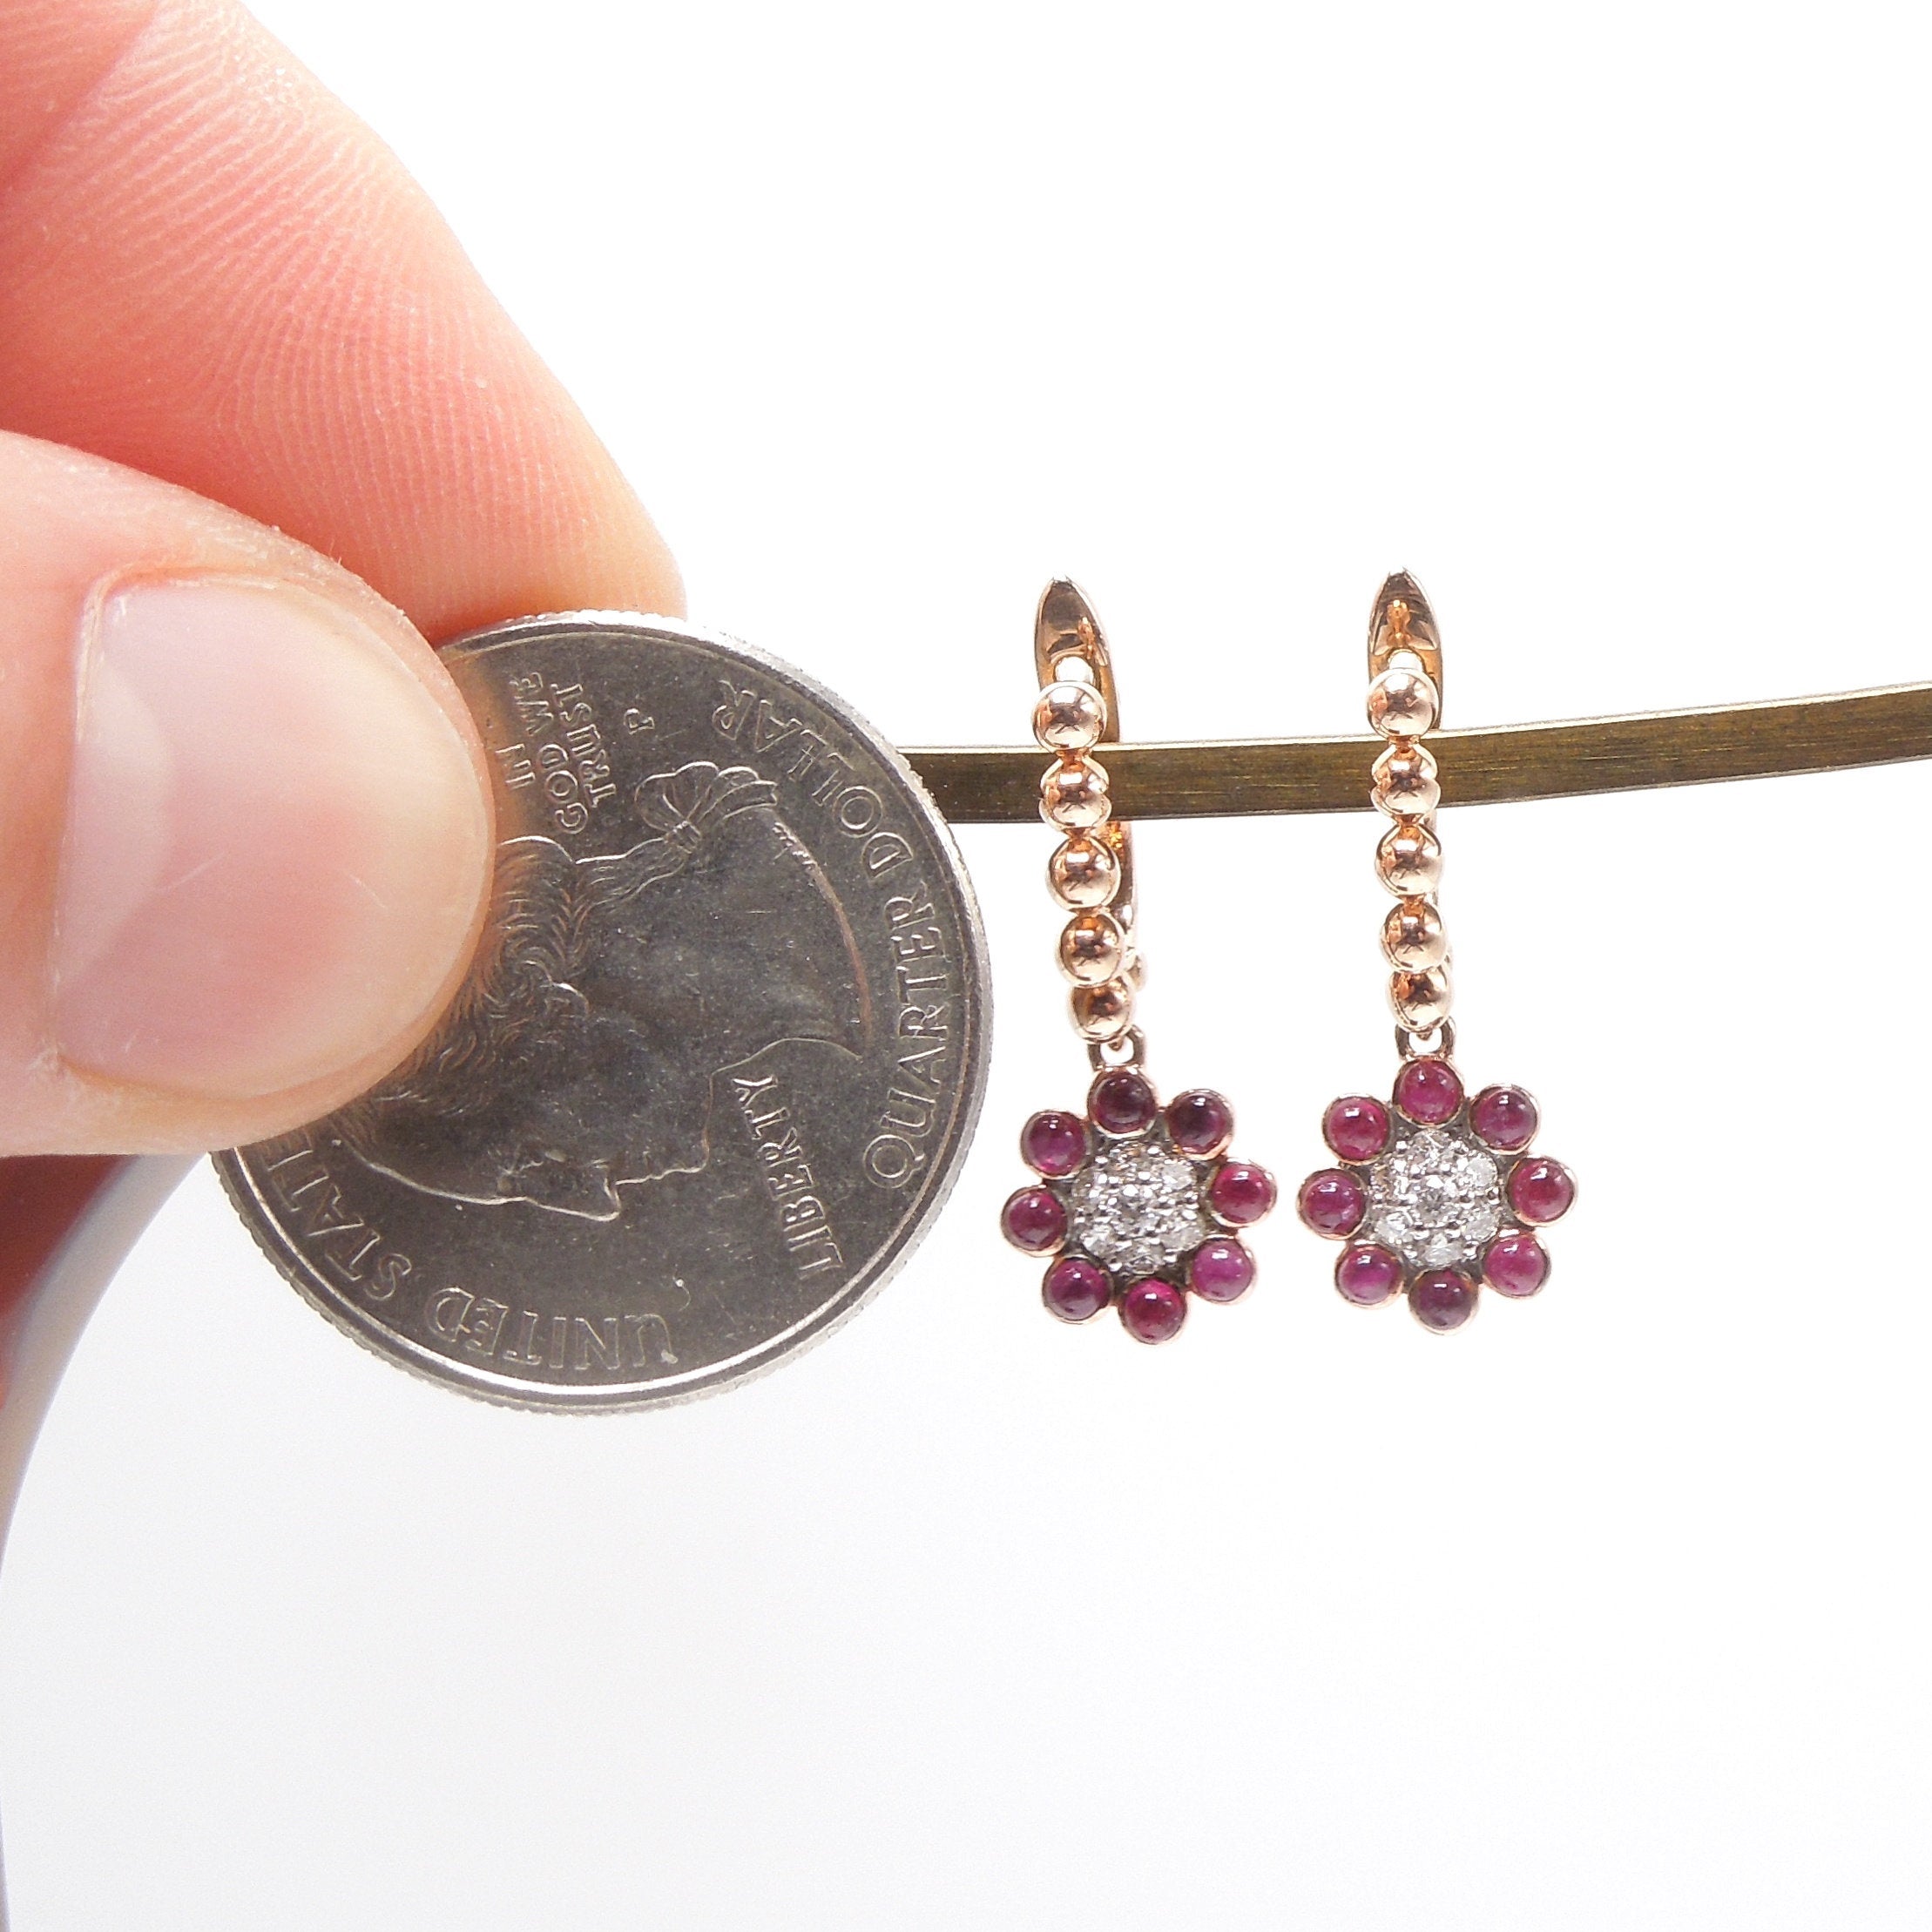 14K Rose Gold Diamond and Cabochon Ruby Flower Drop Earrings